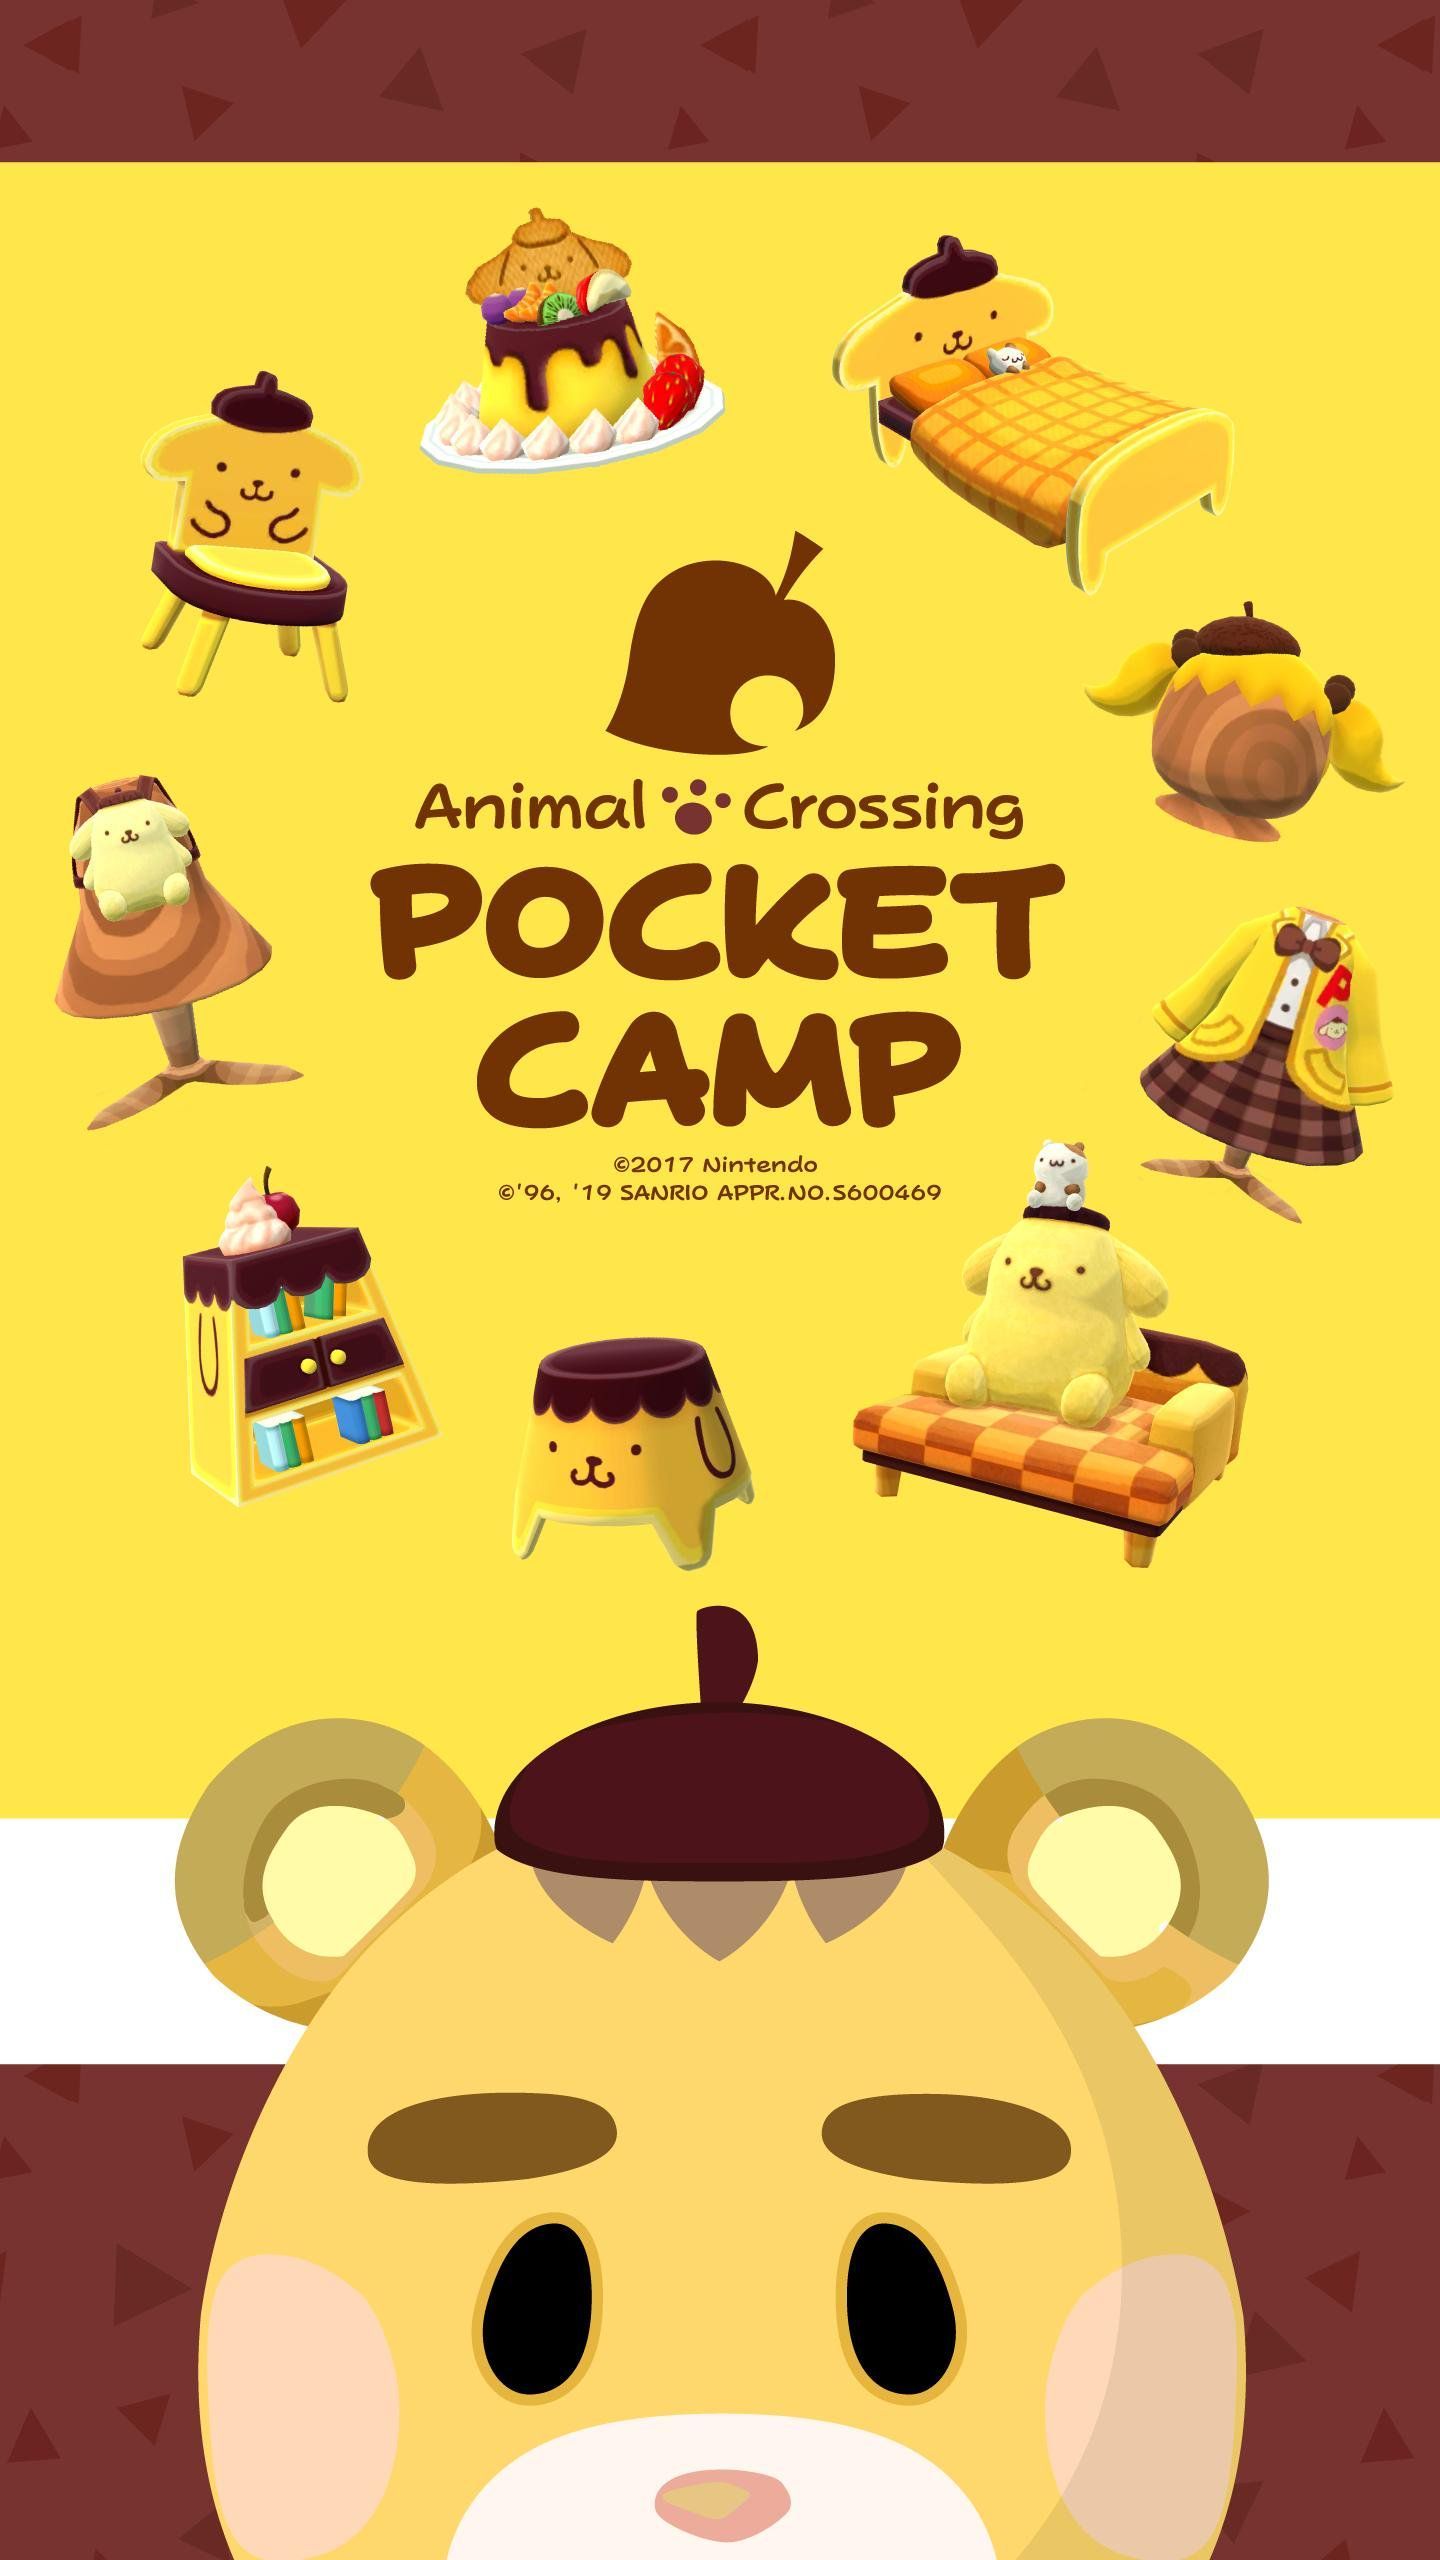 New wallpaper! Official set of Animal Crossing Sanrio phone wallpaper released, get them here Crossing World